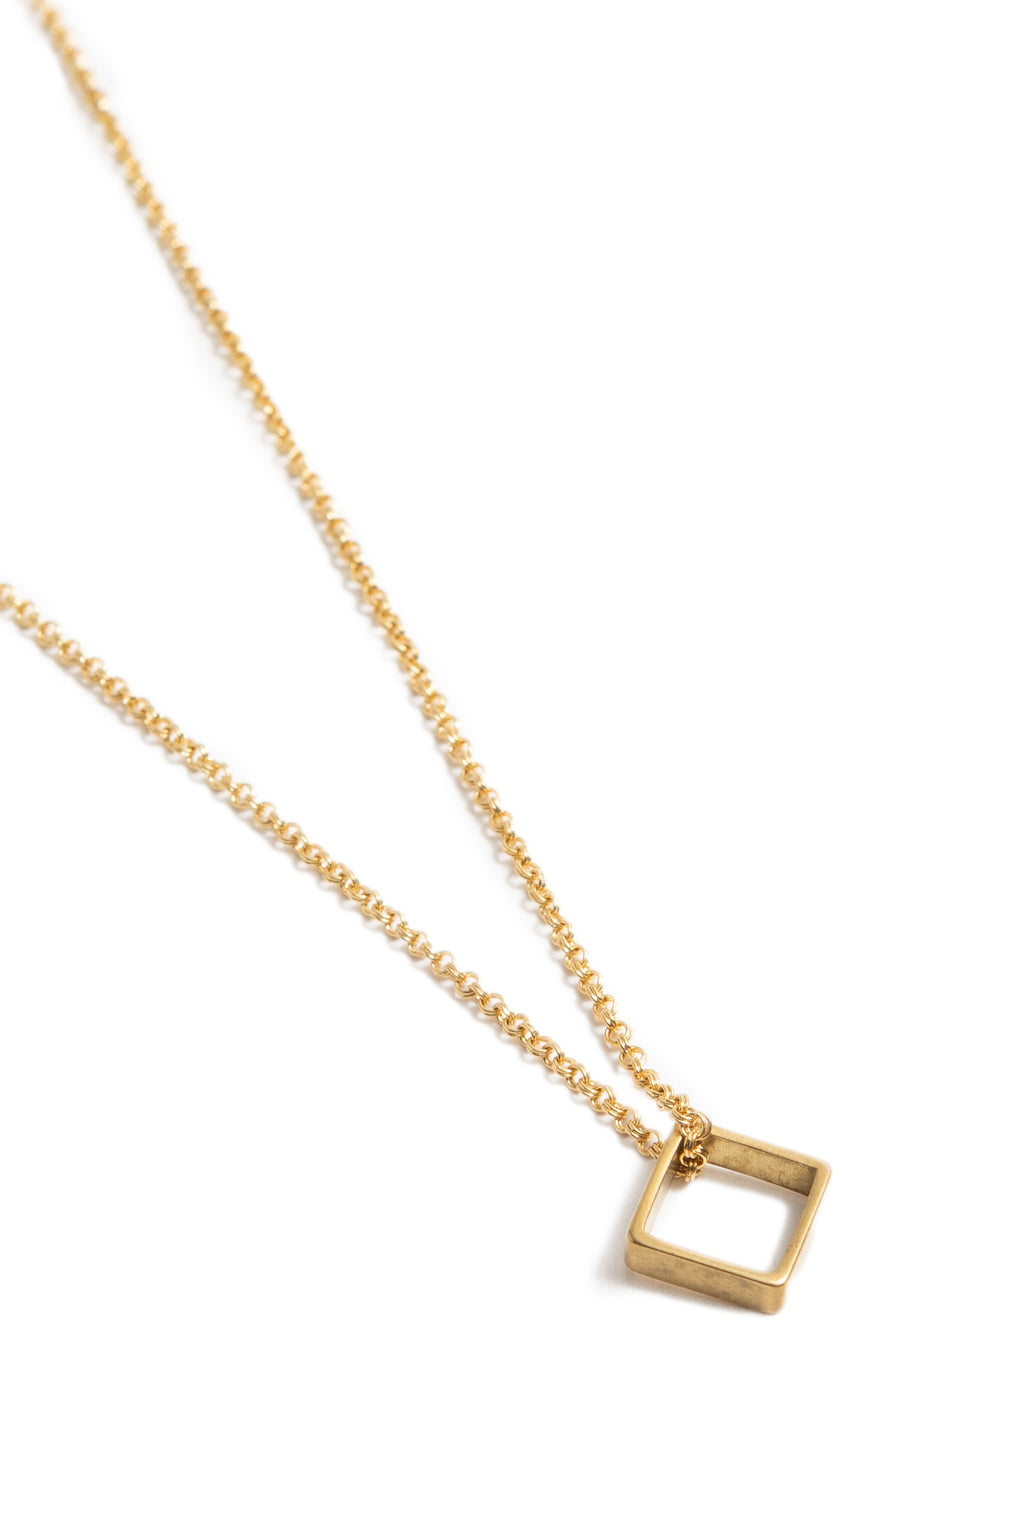 Small Brass Square Necklace on Gold Chain